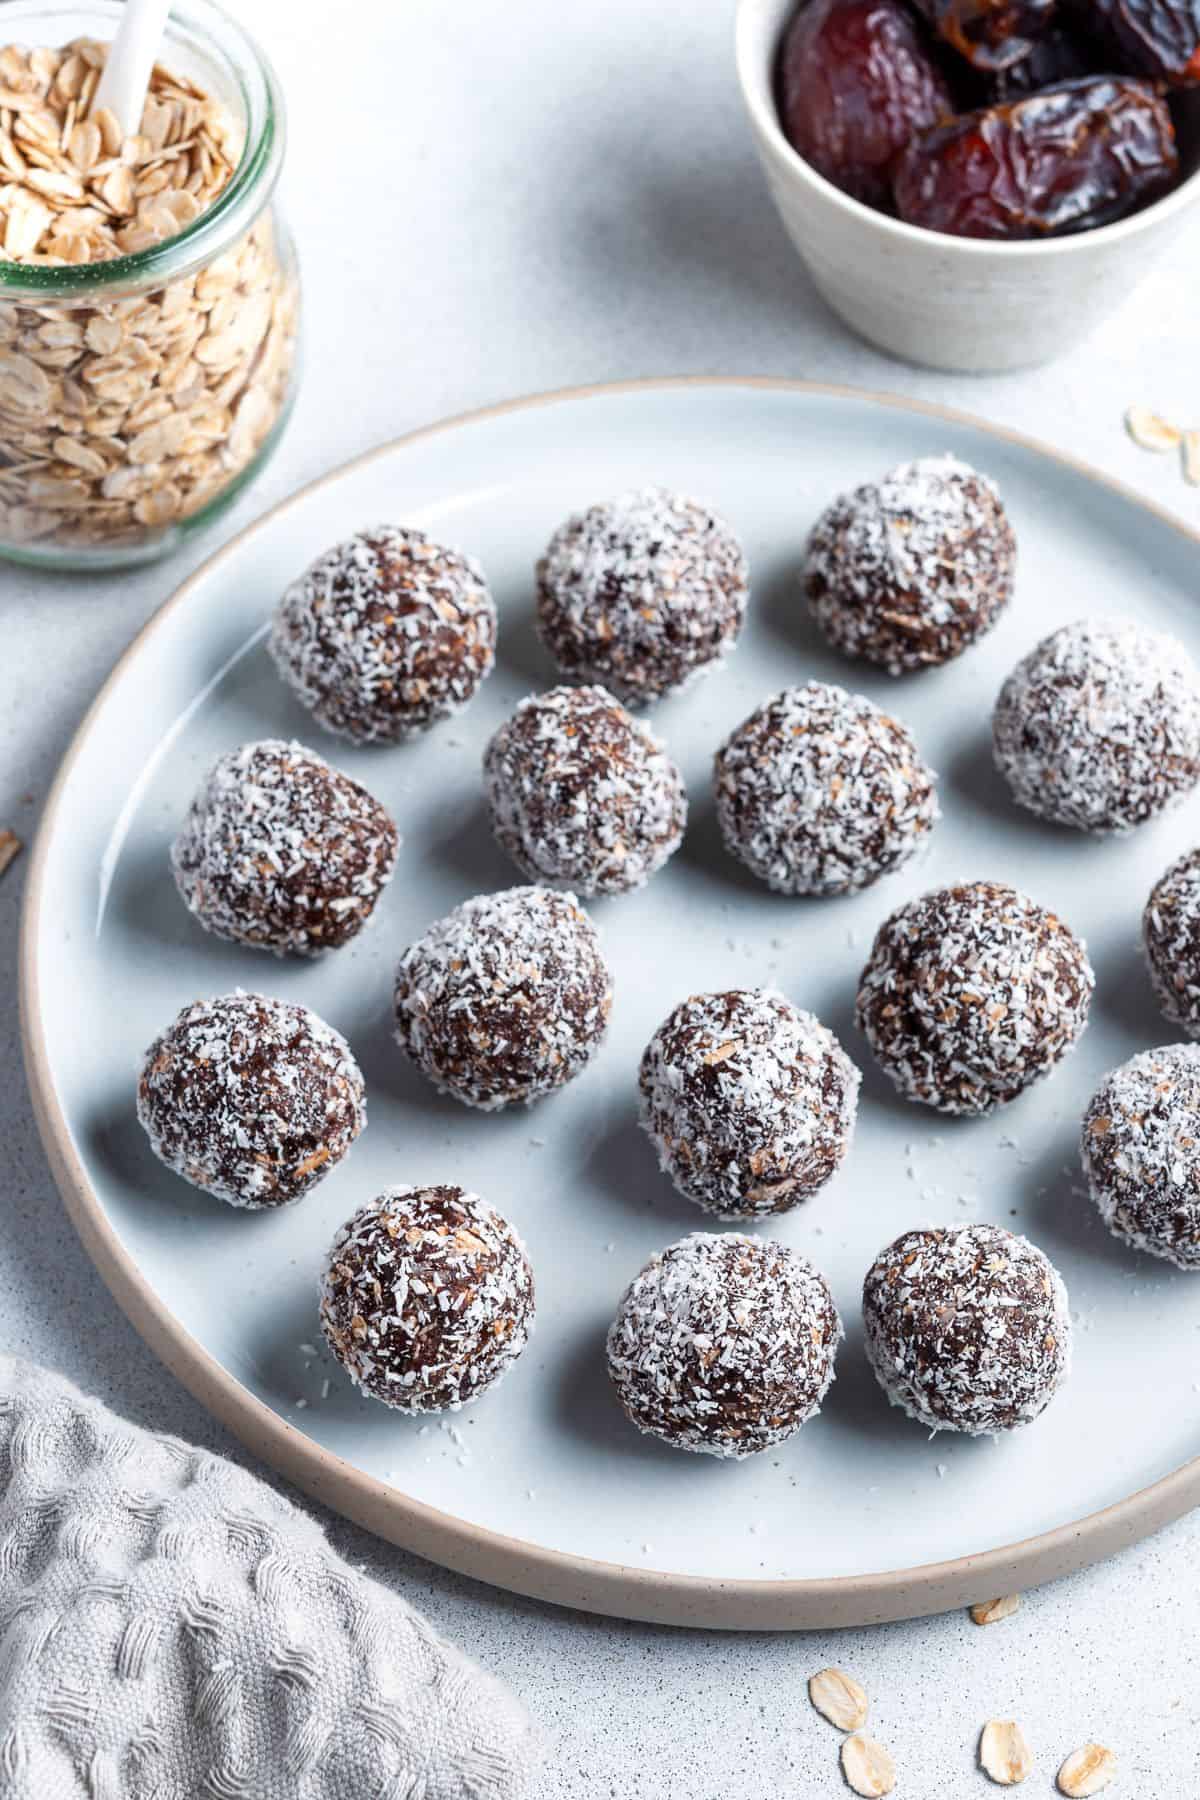 Round plate of bliss balls, with a jar of oats, a dish of dates and a cloth around the edge.